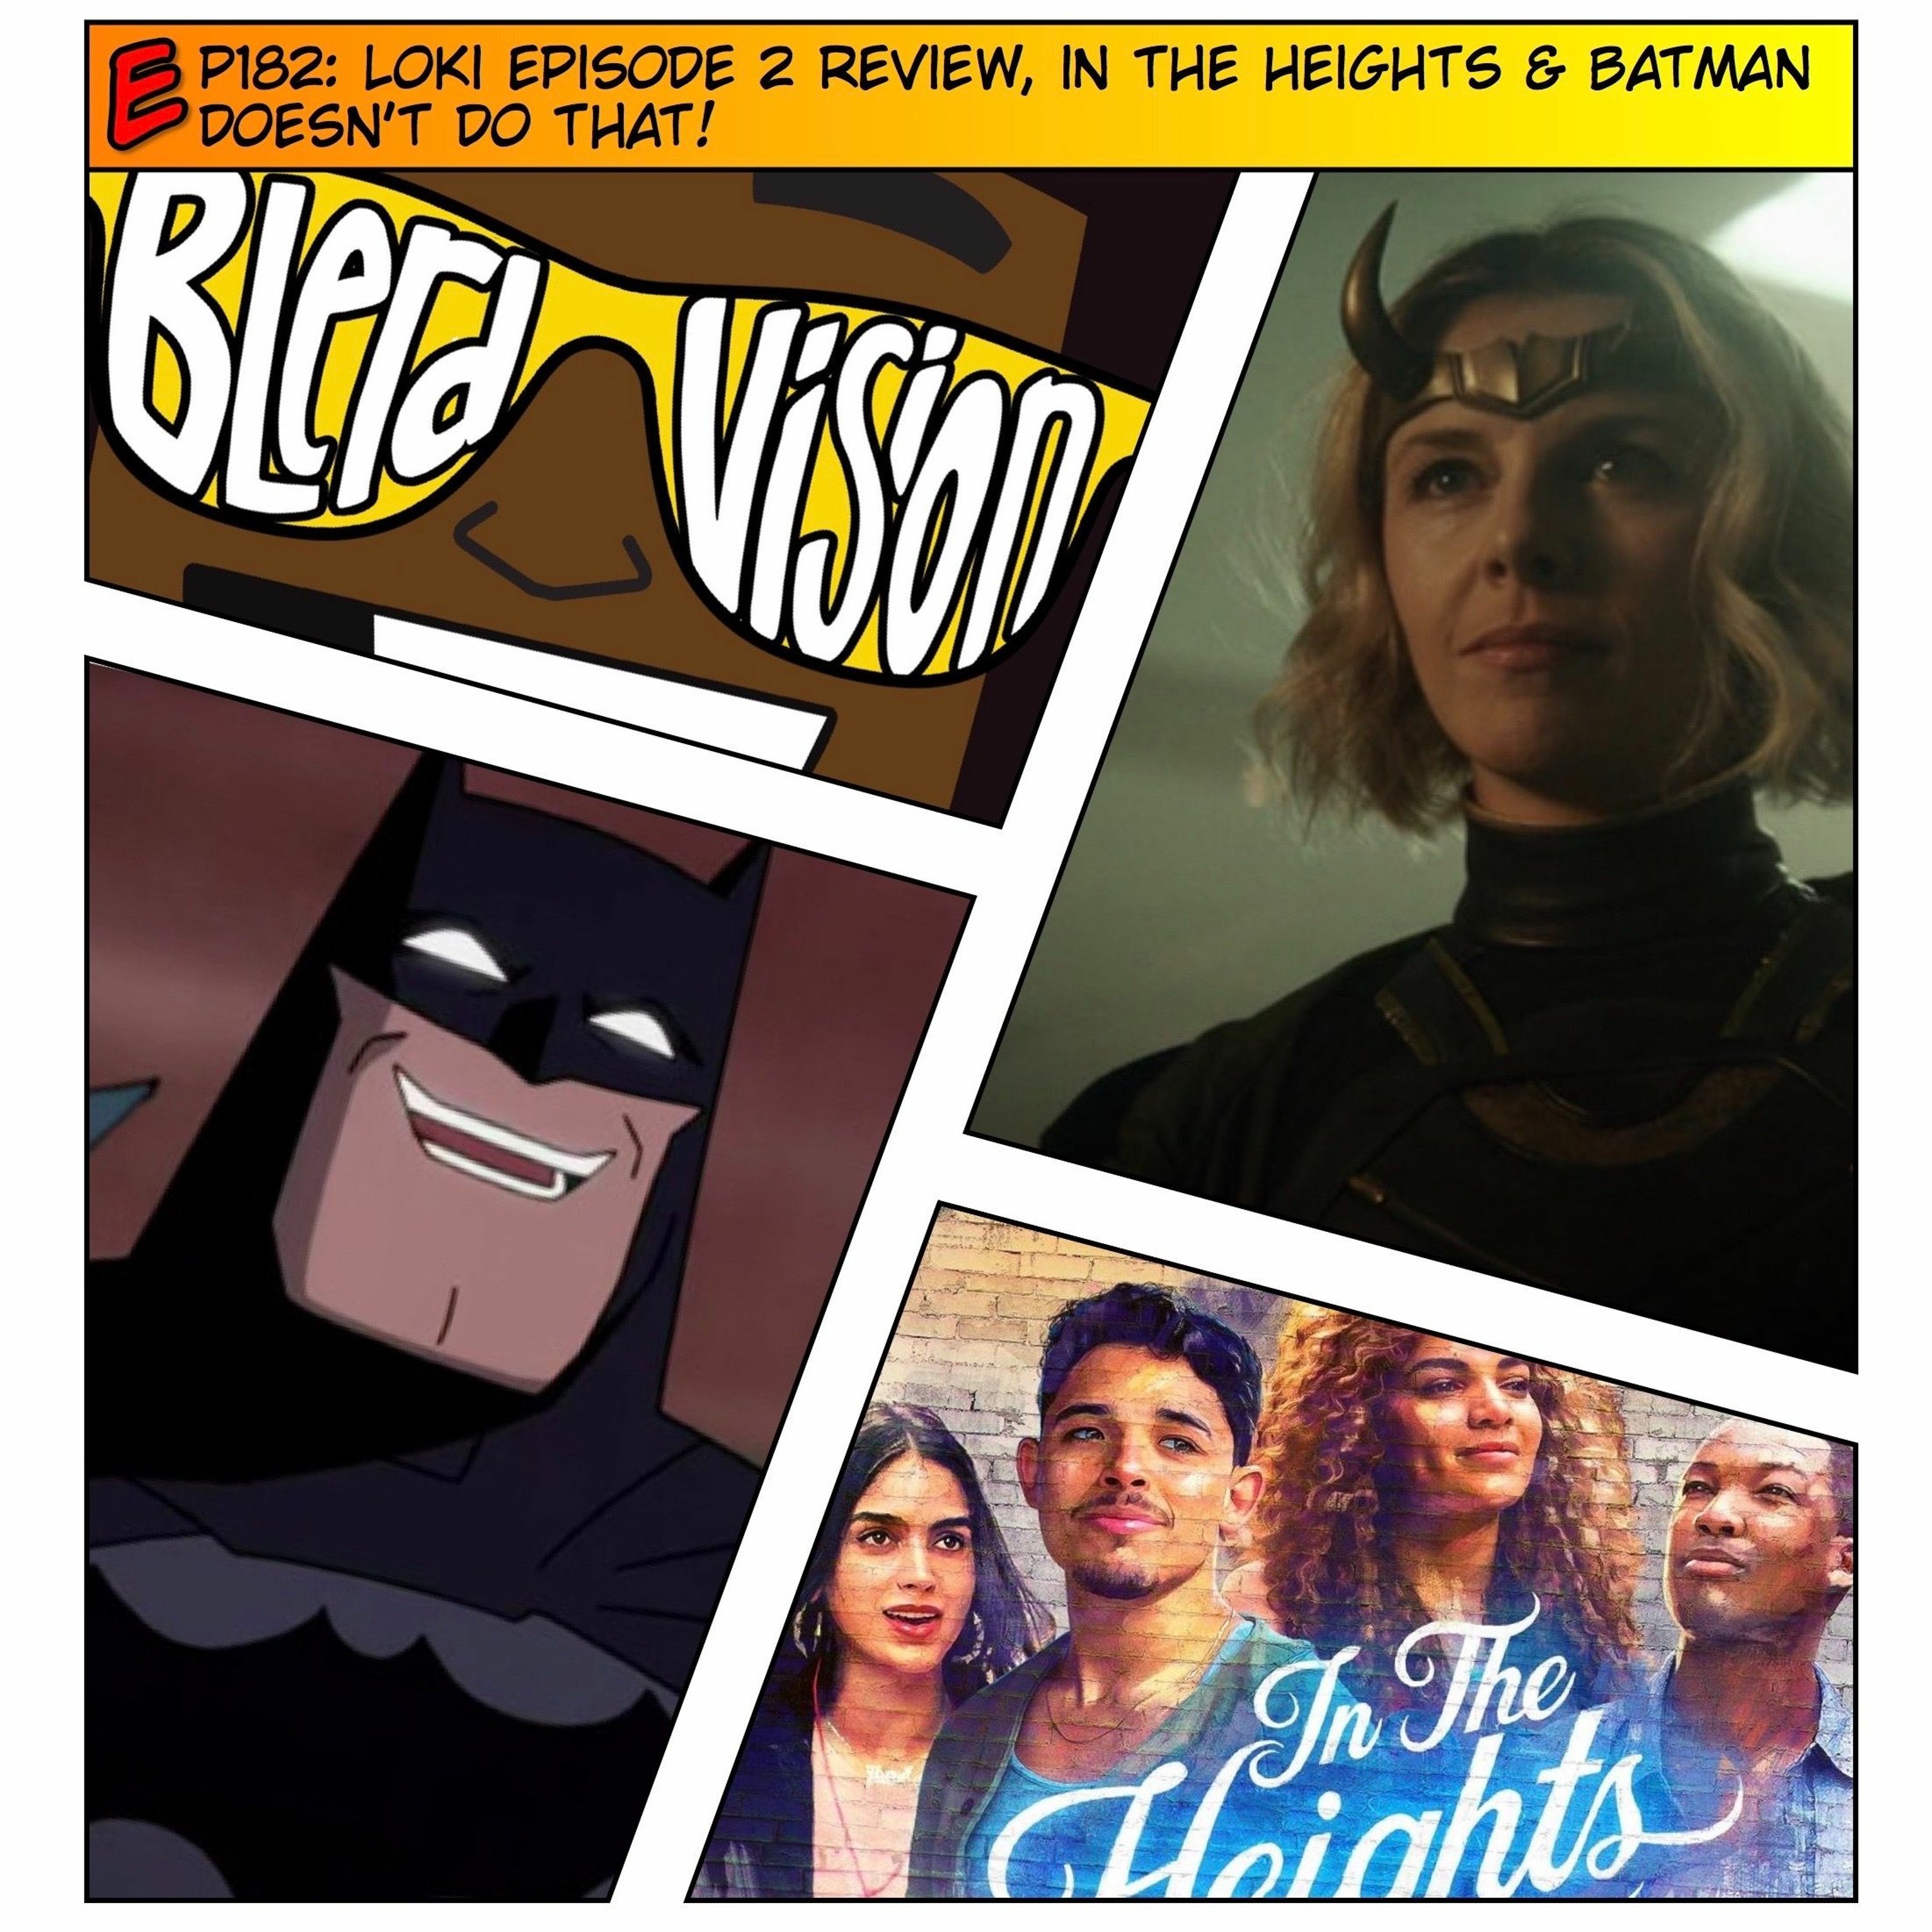 EP182: Loki Episode 2 Review, In The Heights & Batman Doesn't Do That!